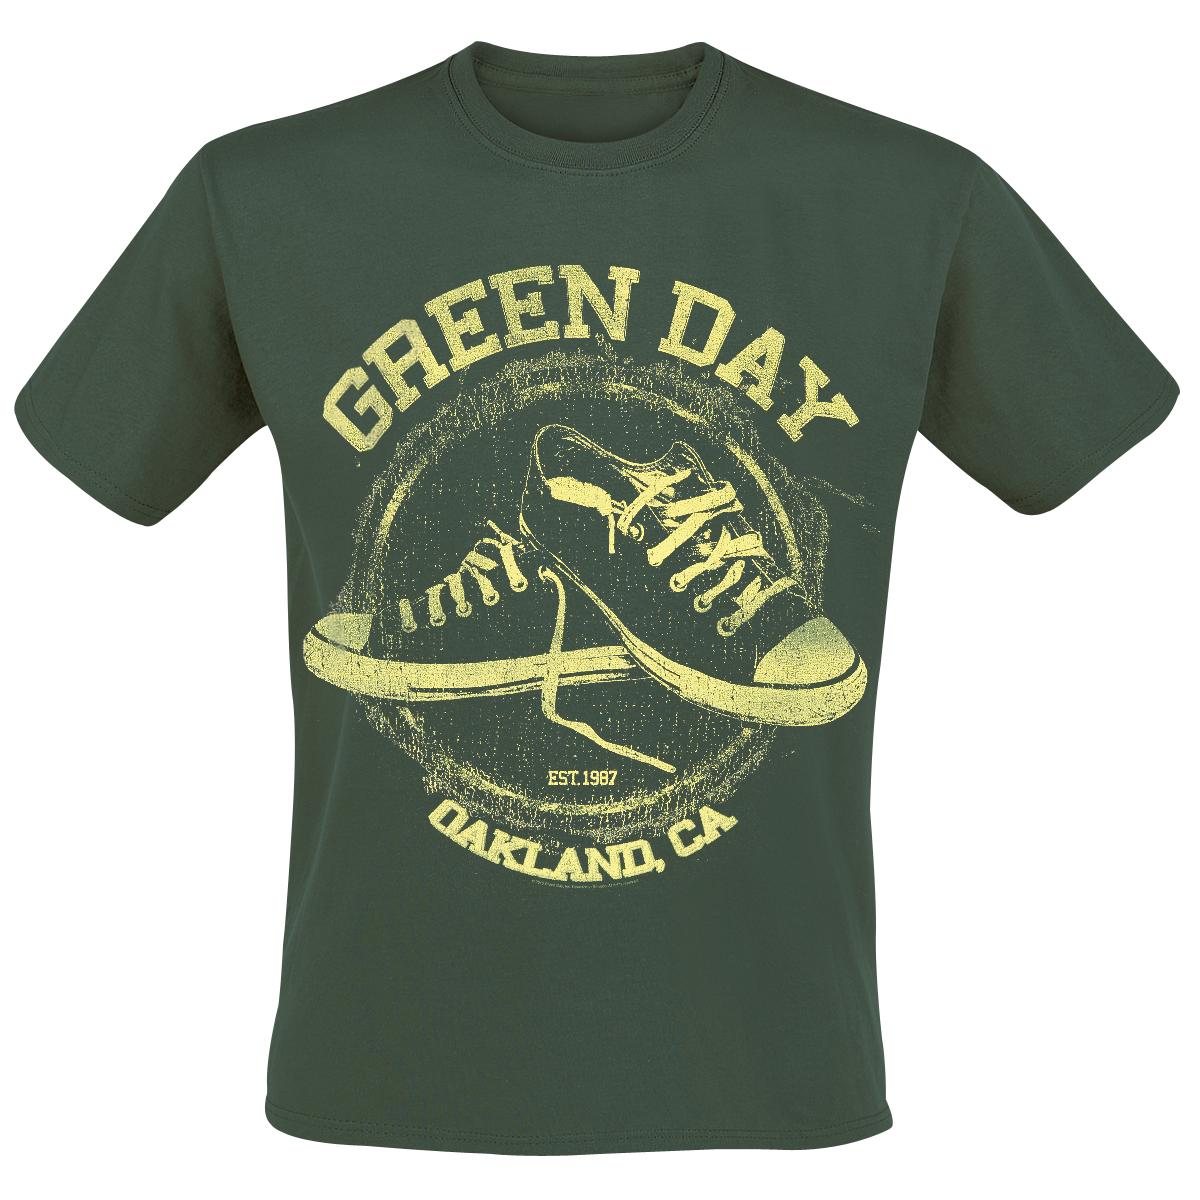 Buy Green Day T Shirt 60 Off Share Discount